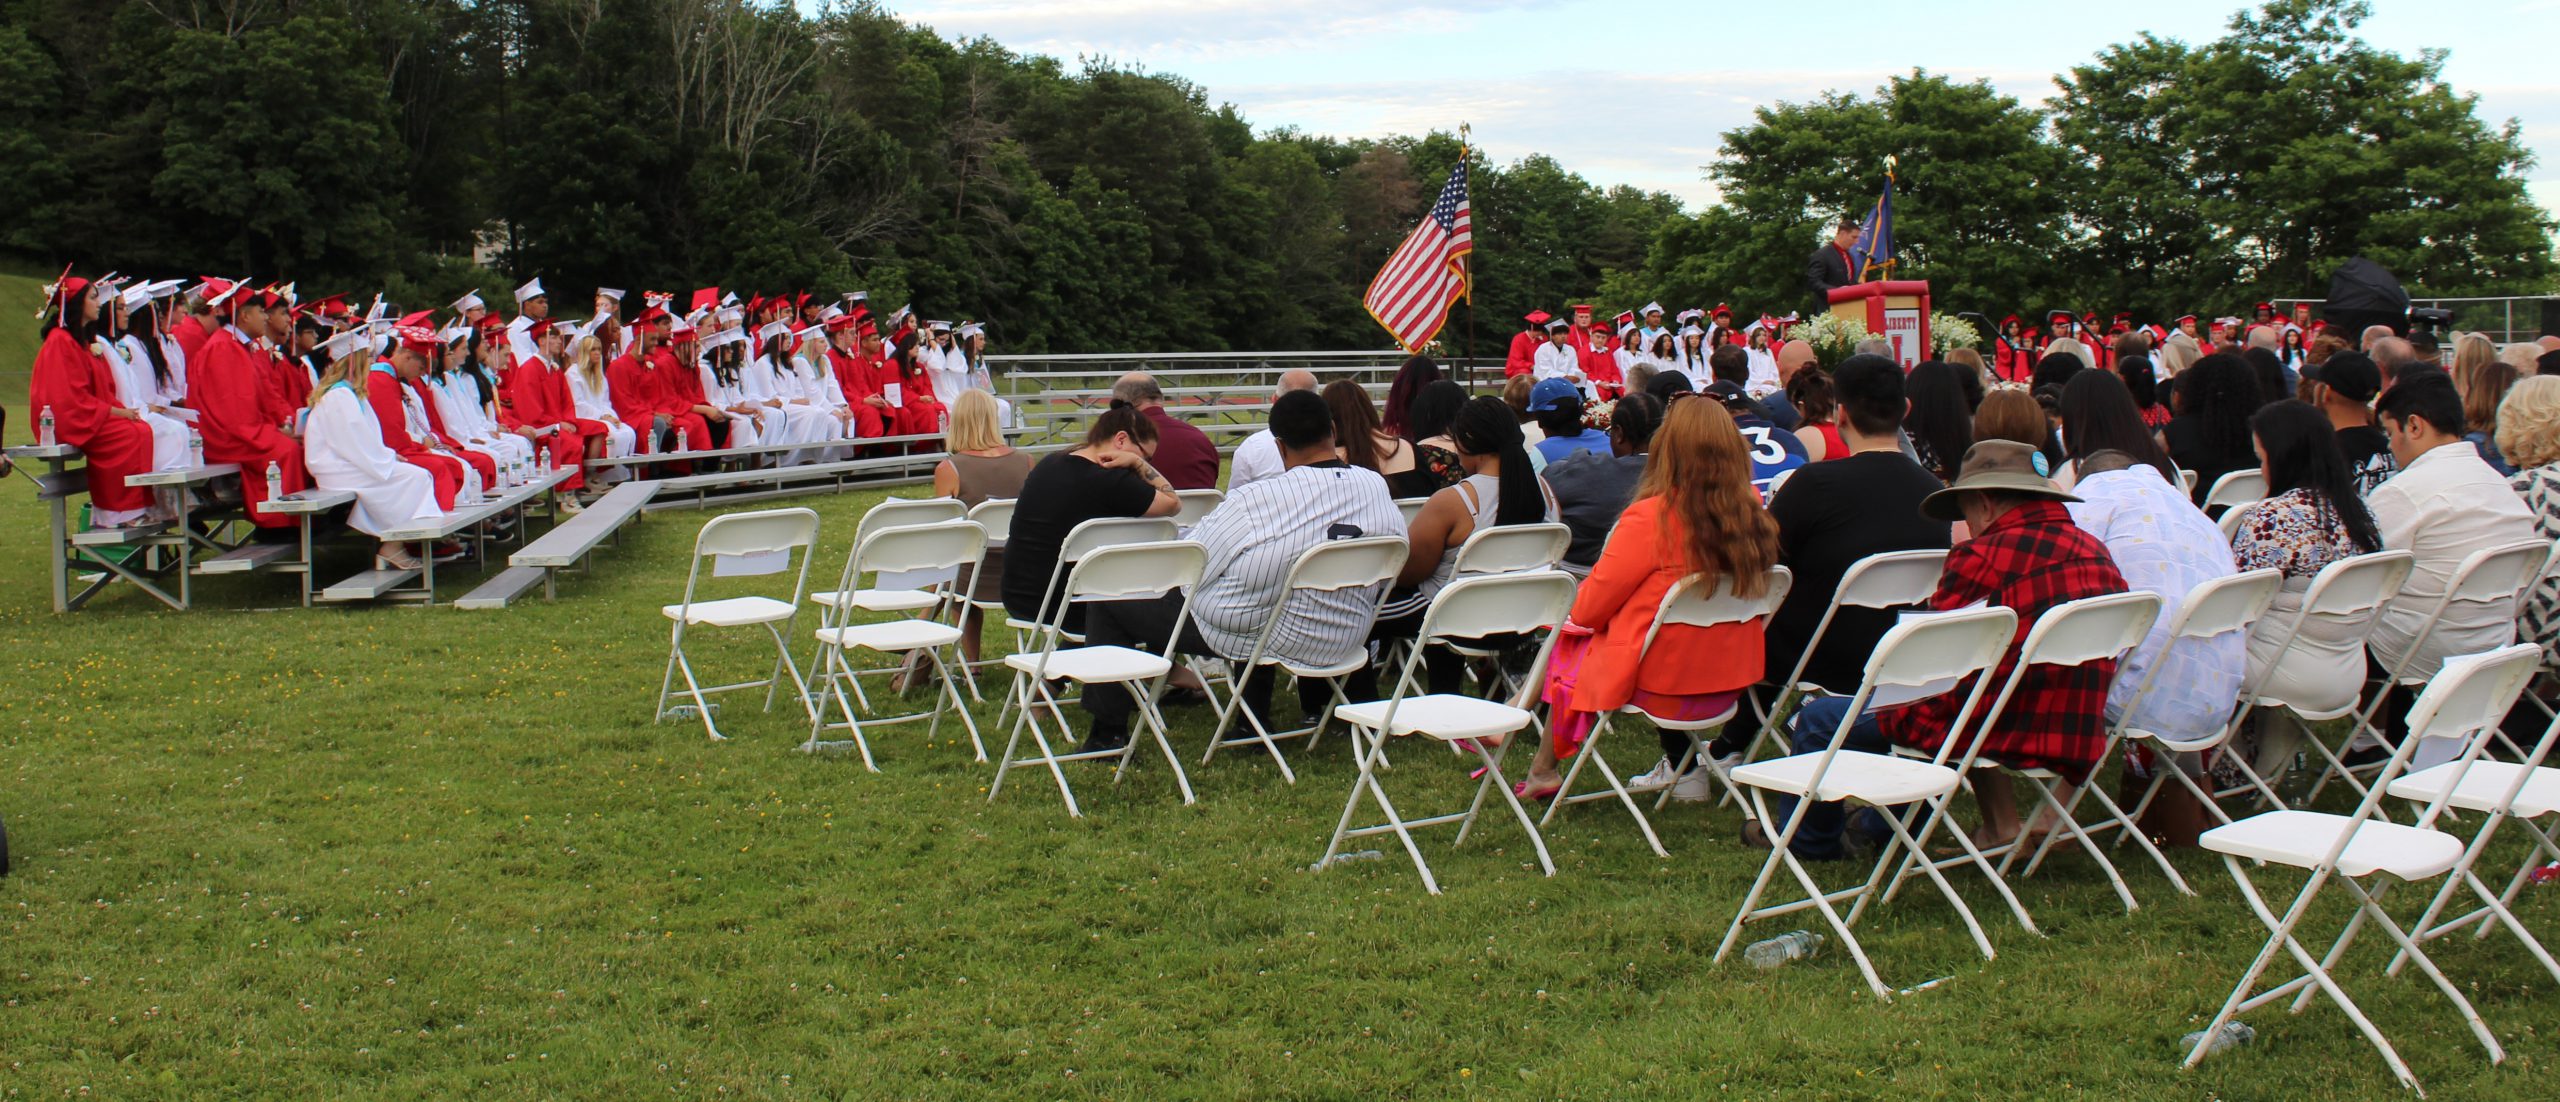 The audience watches the graduation ceremony